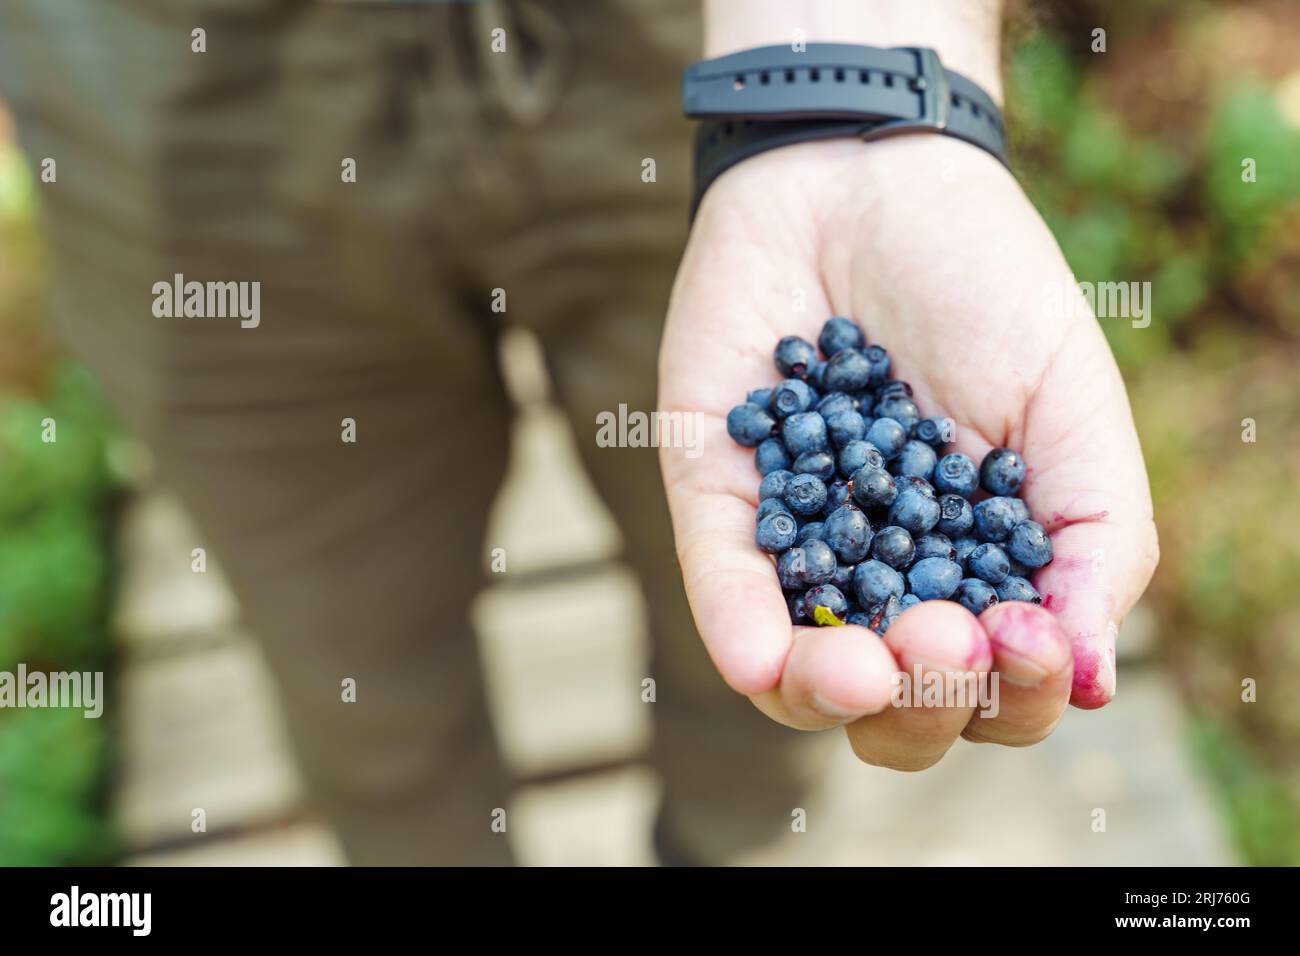 A man picked wild blueberries and holds them in his hand Stock Photo